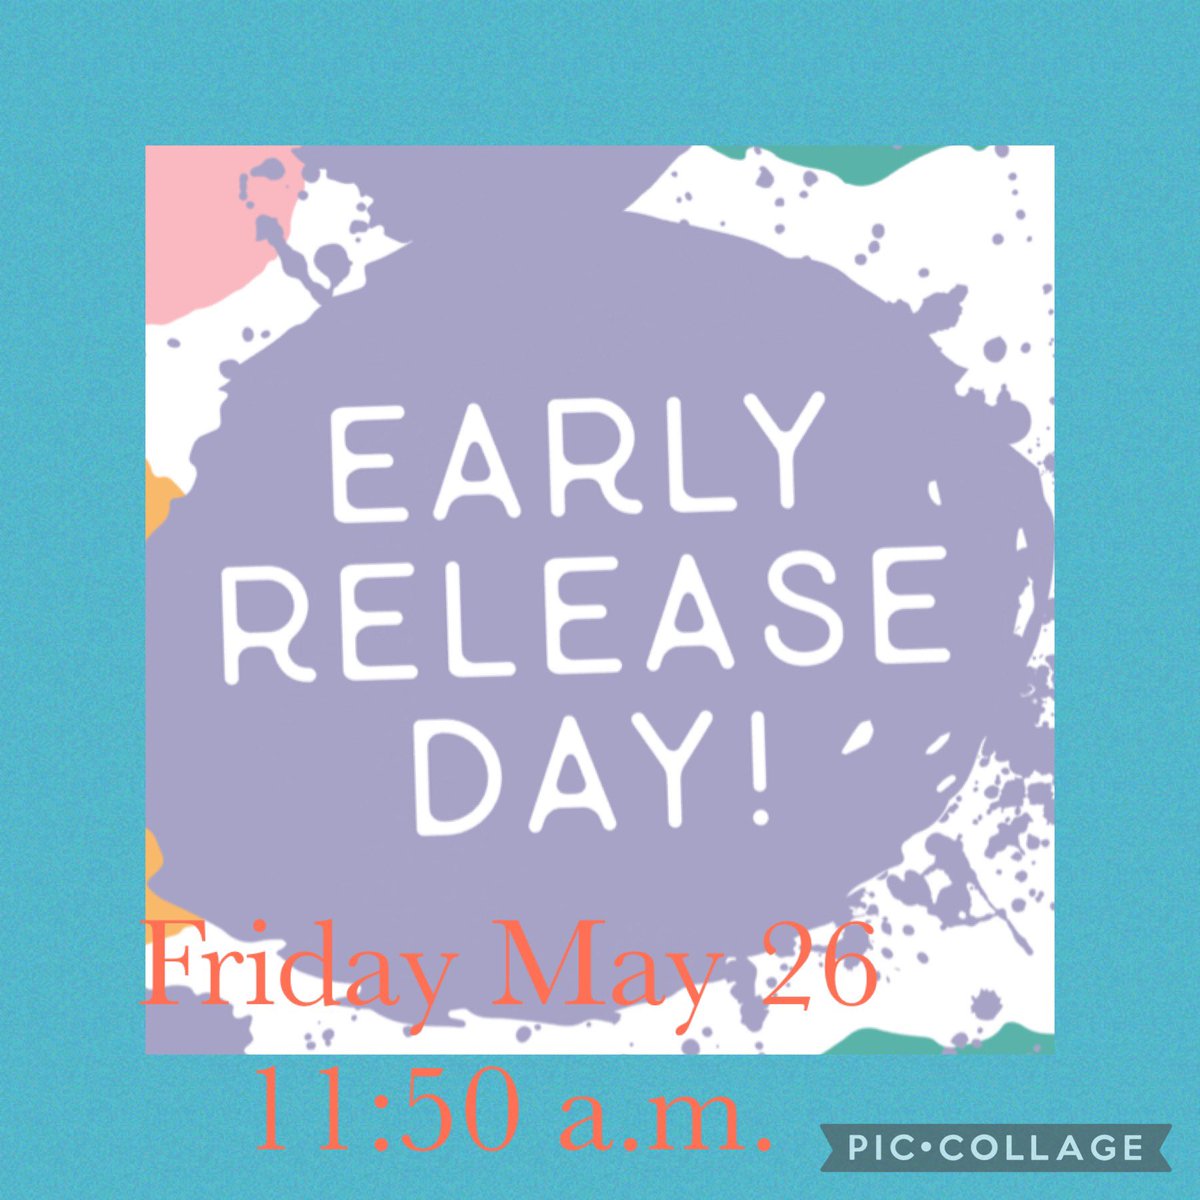 mark your calendars @EESpanthers #earlyrelease #thisfriday 😎